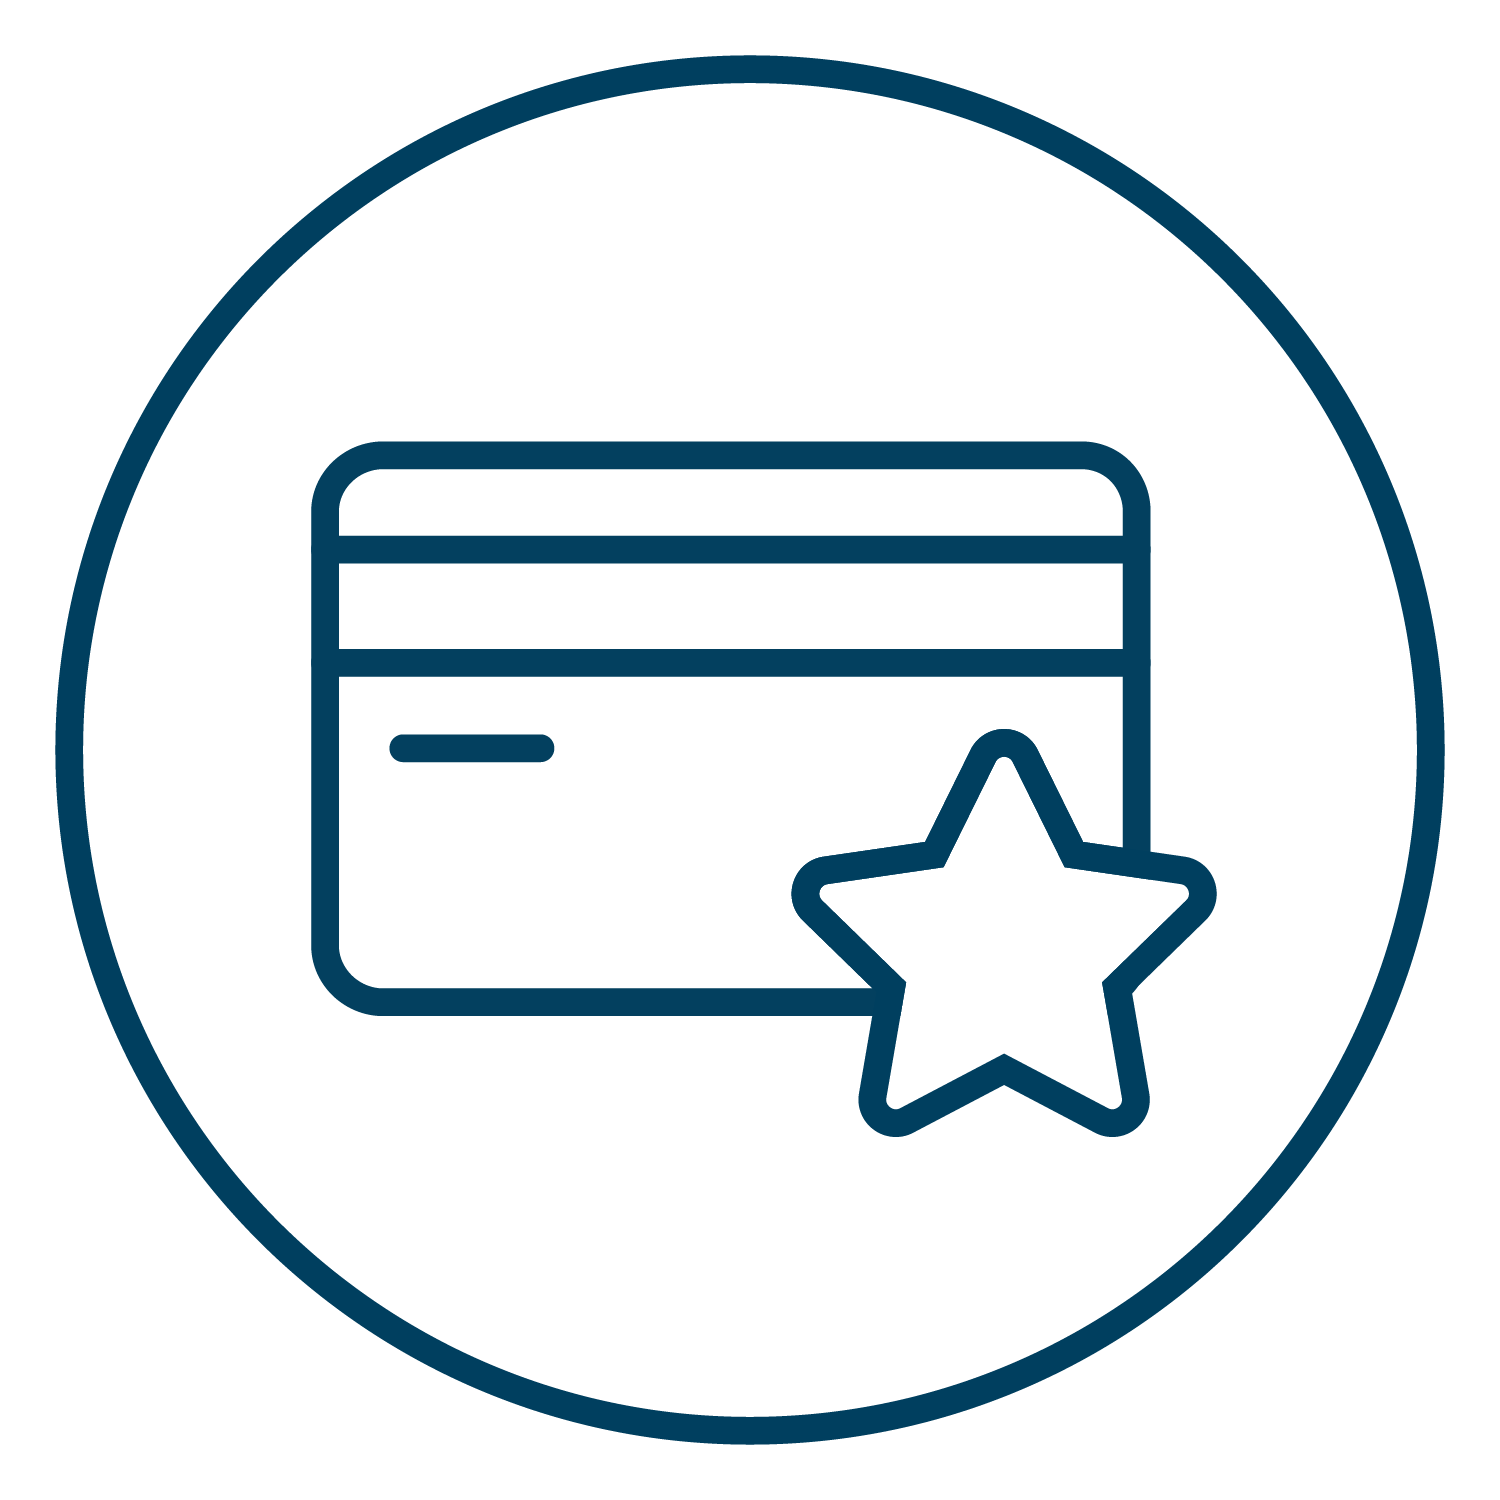 Credit card outline with star in circle